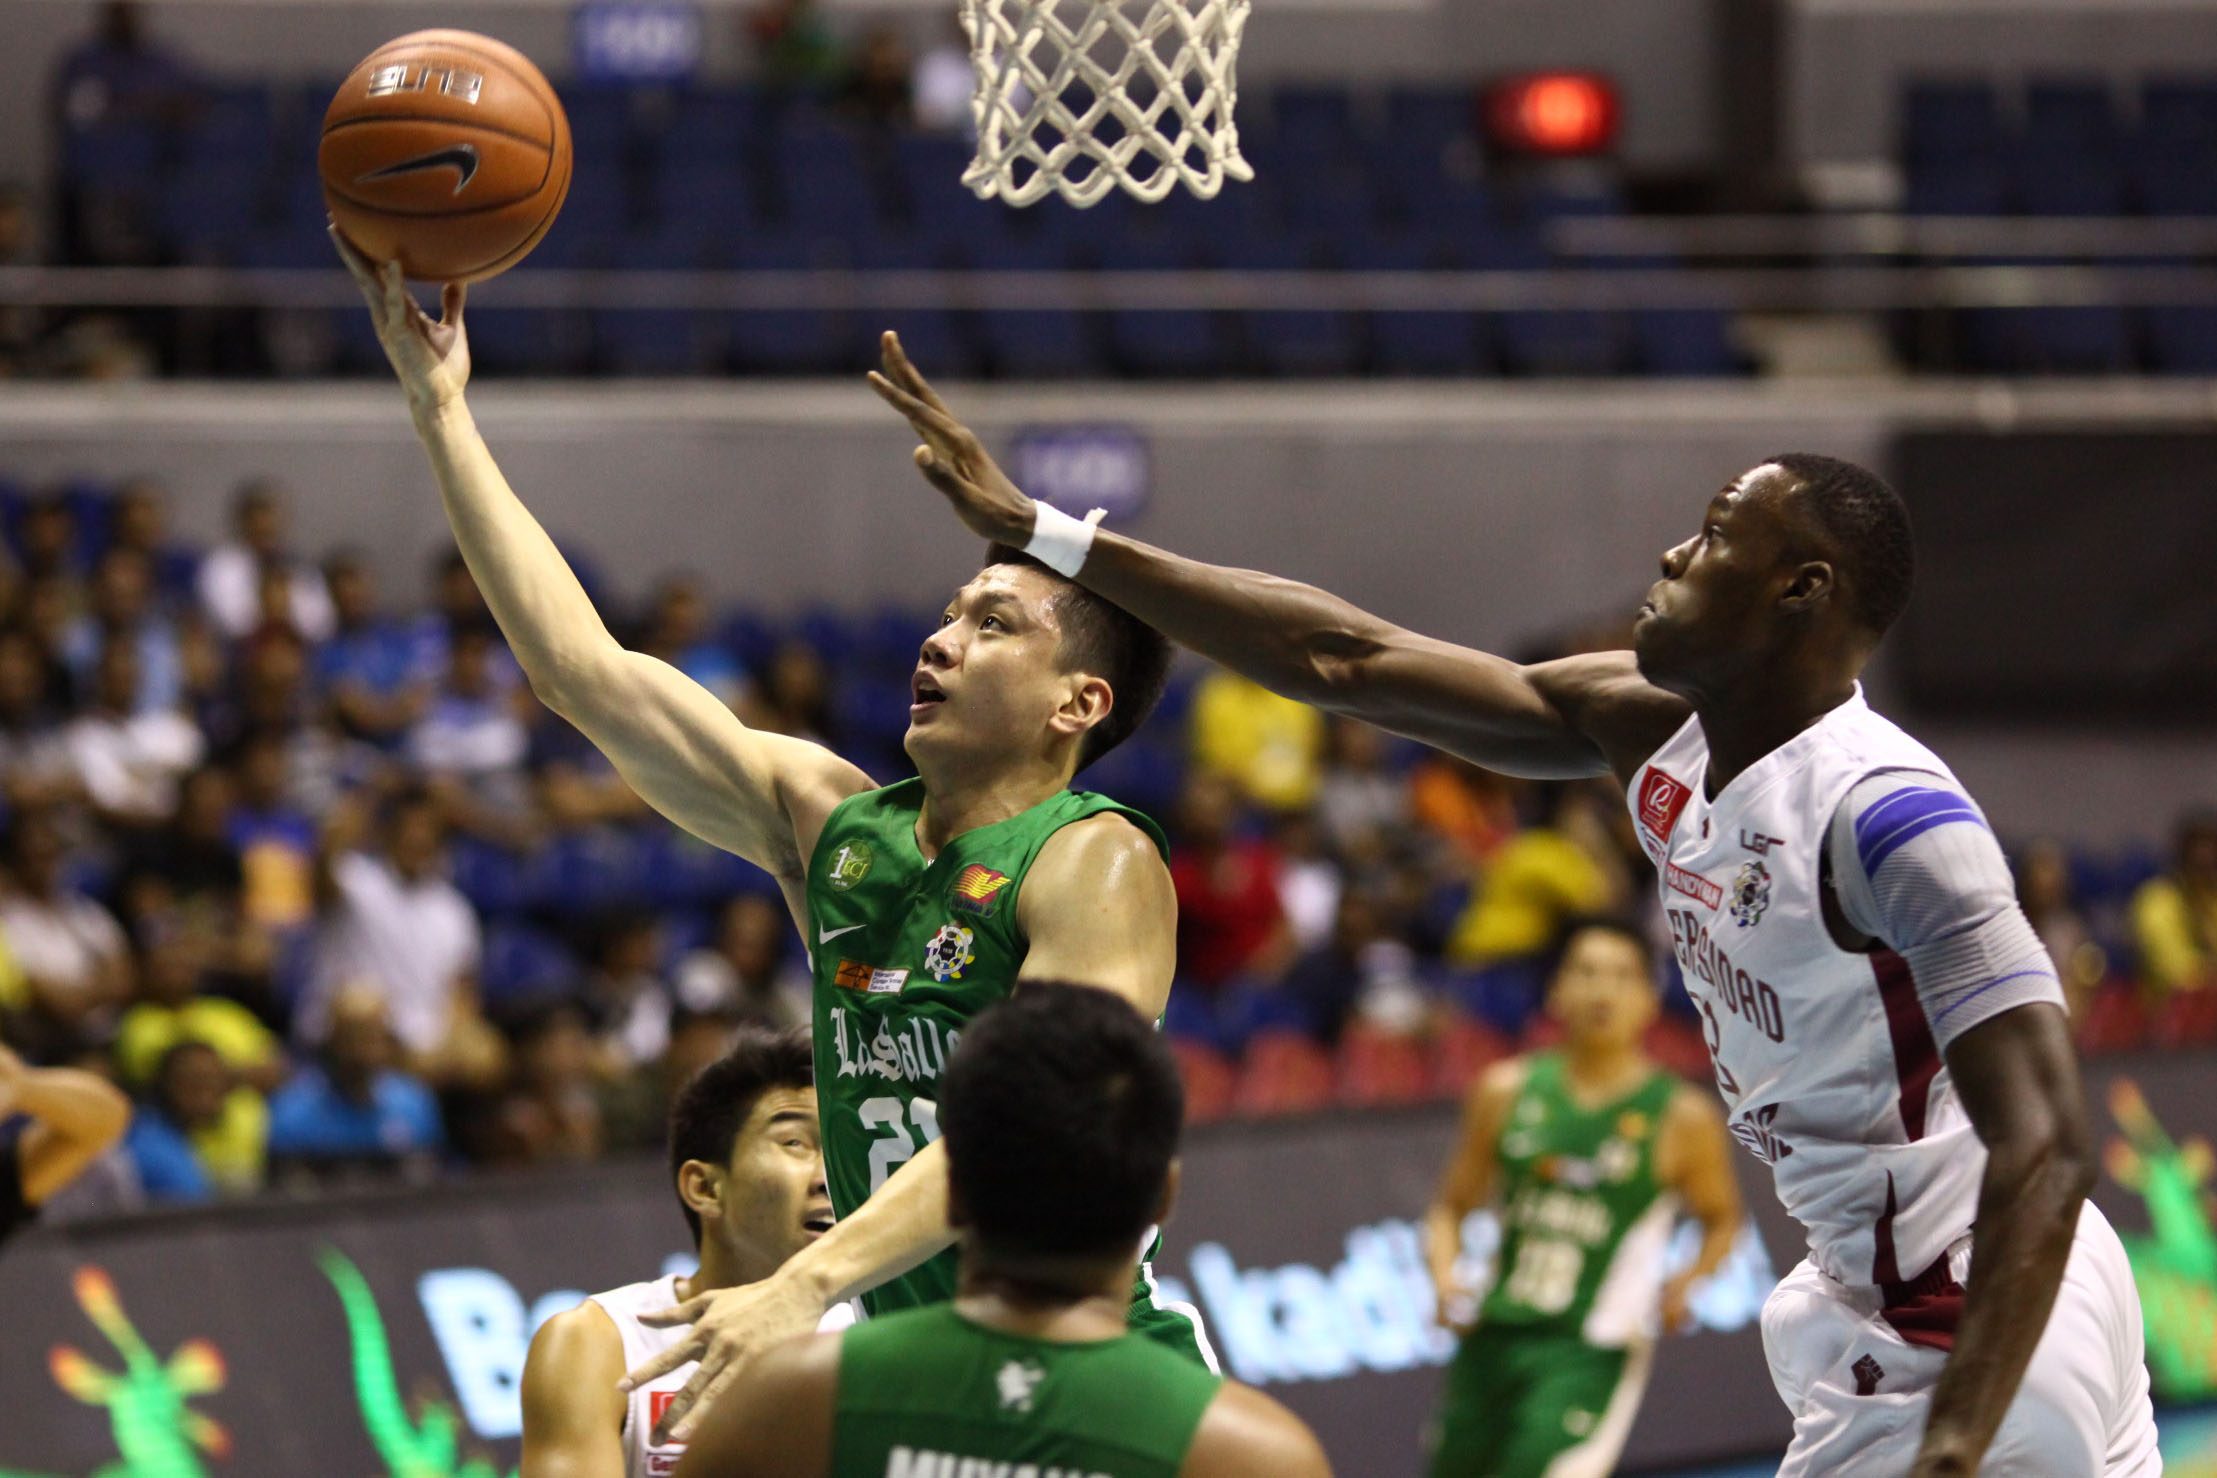 DLSU steps on gas pedal late to trip UP